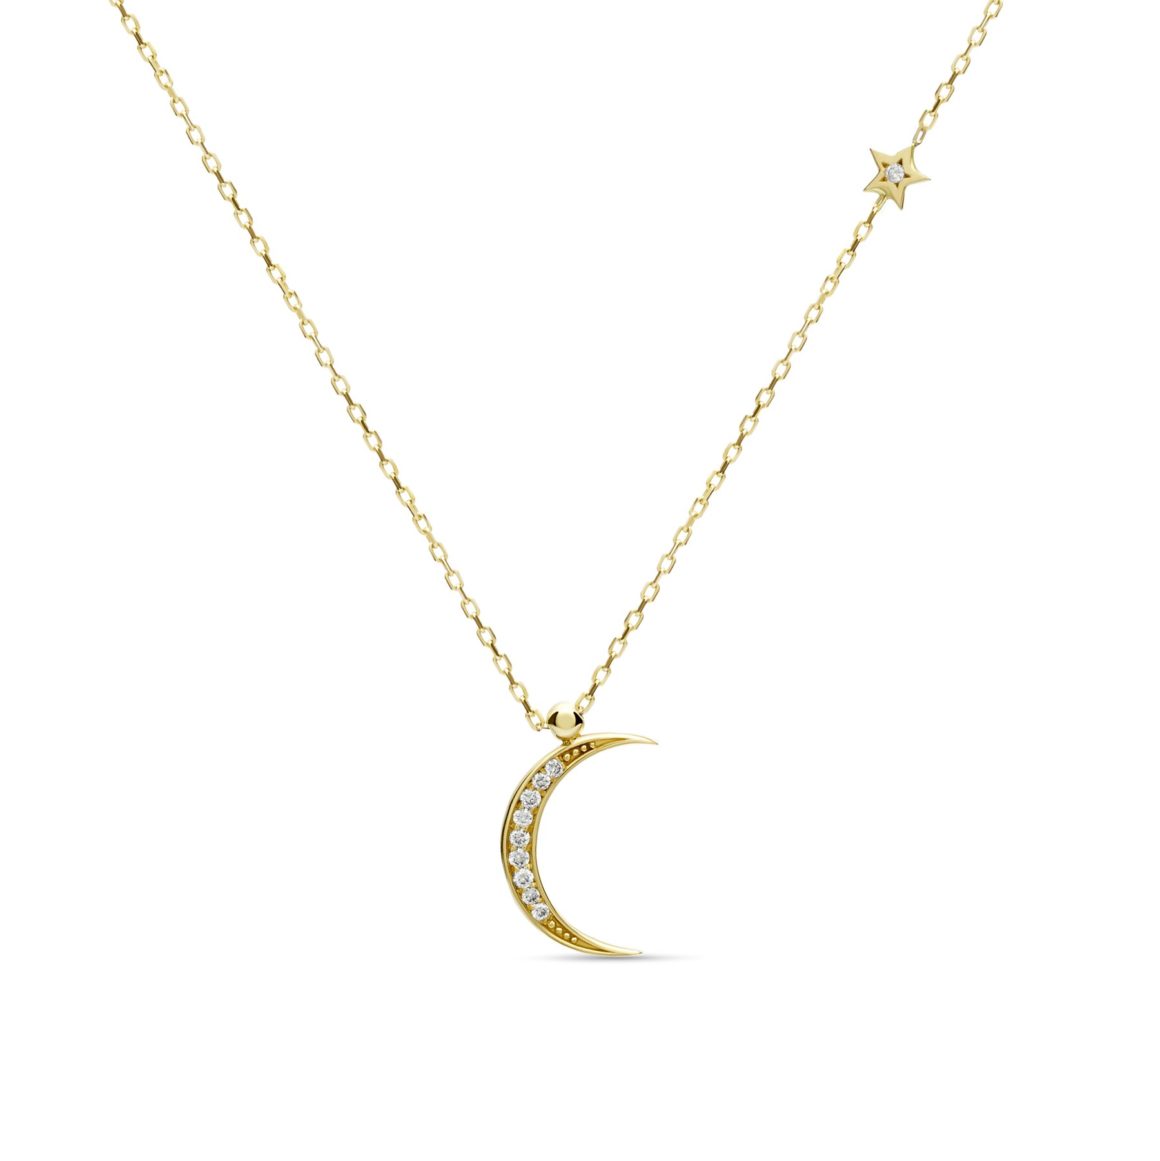 Diamond Crescent Moon and Star Necklace, €575